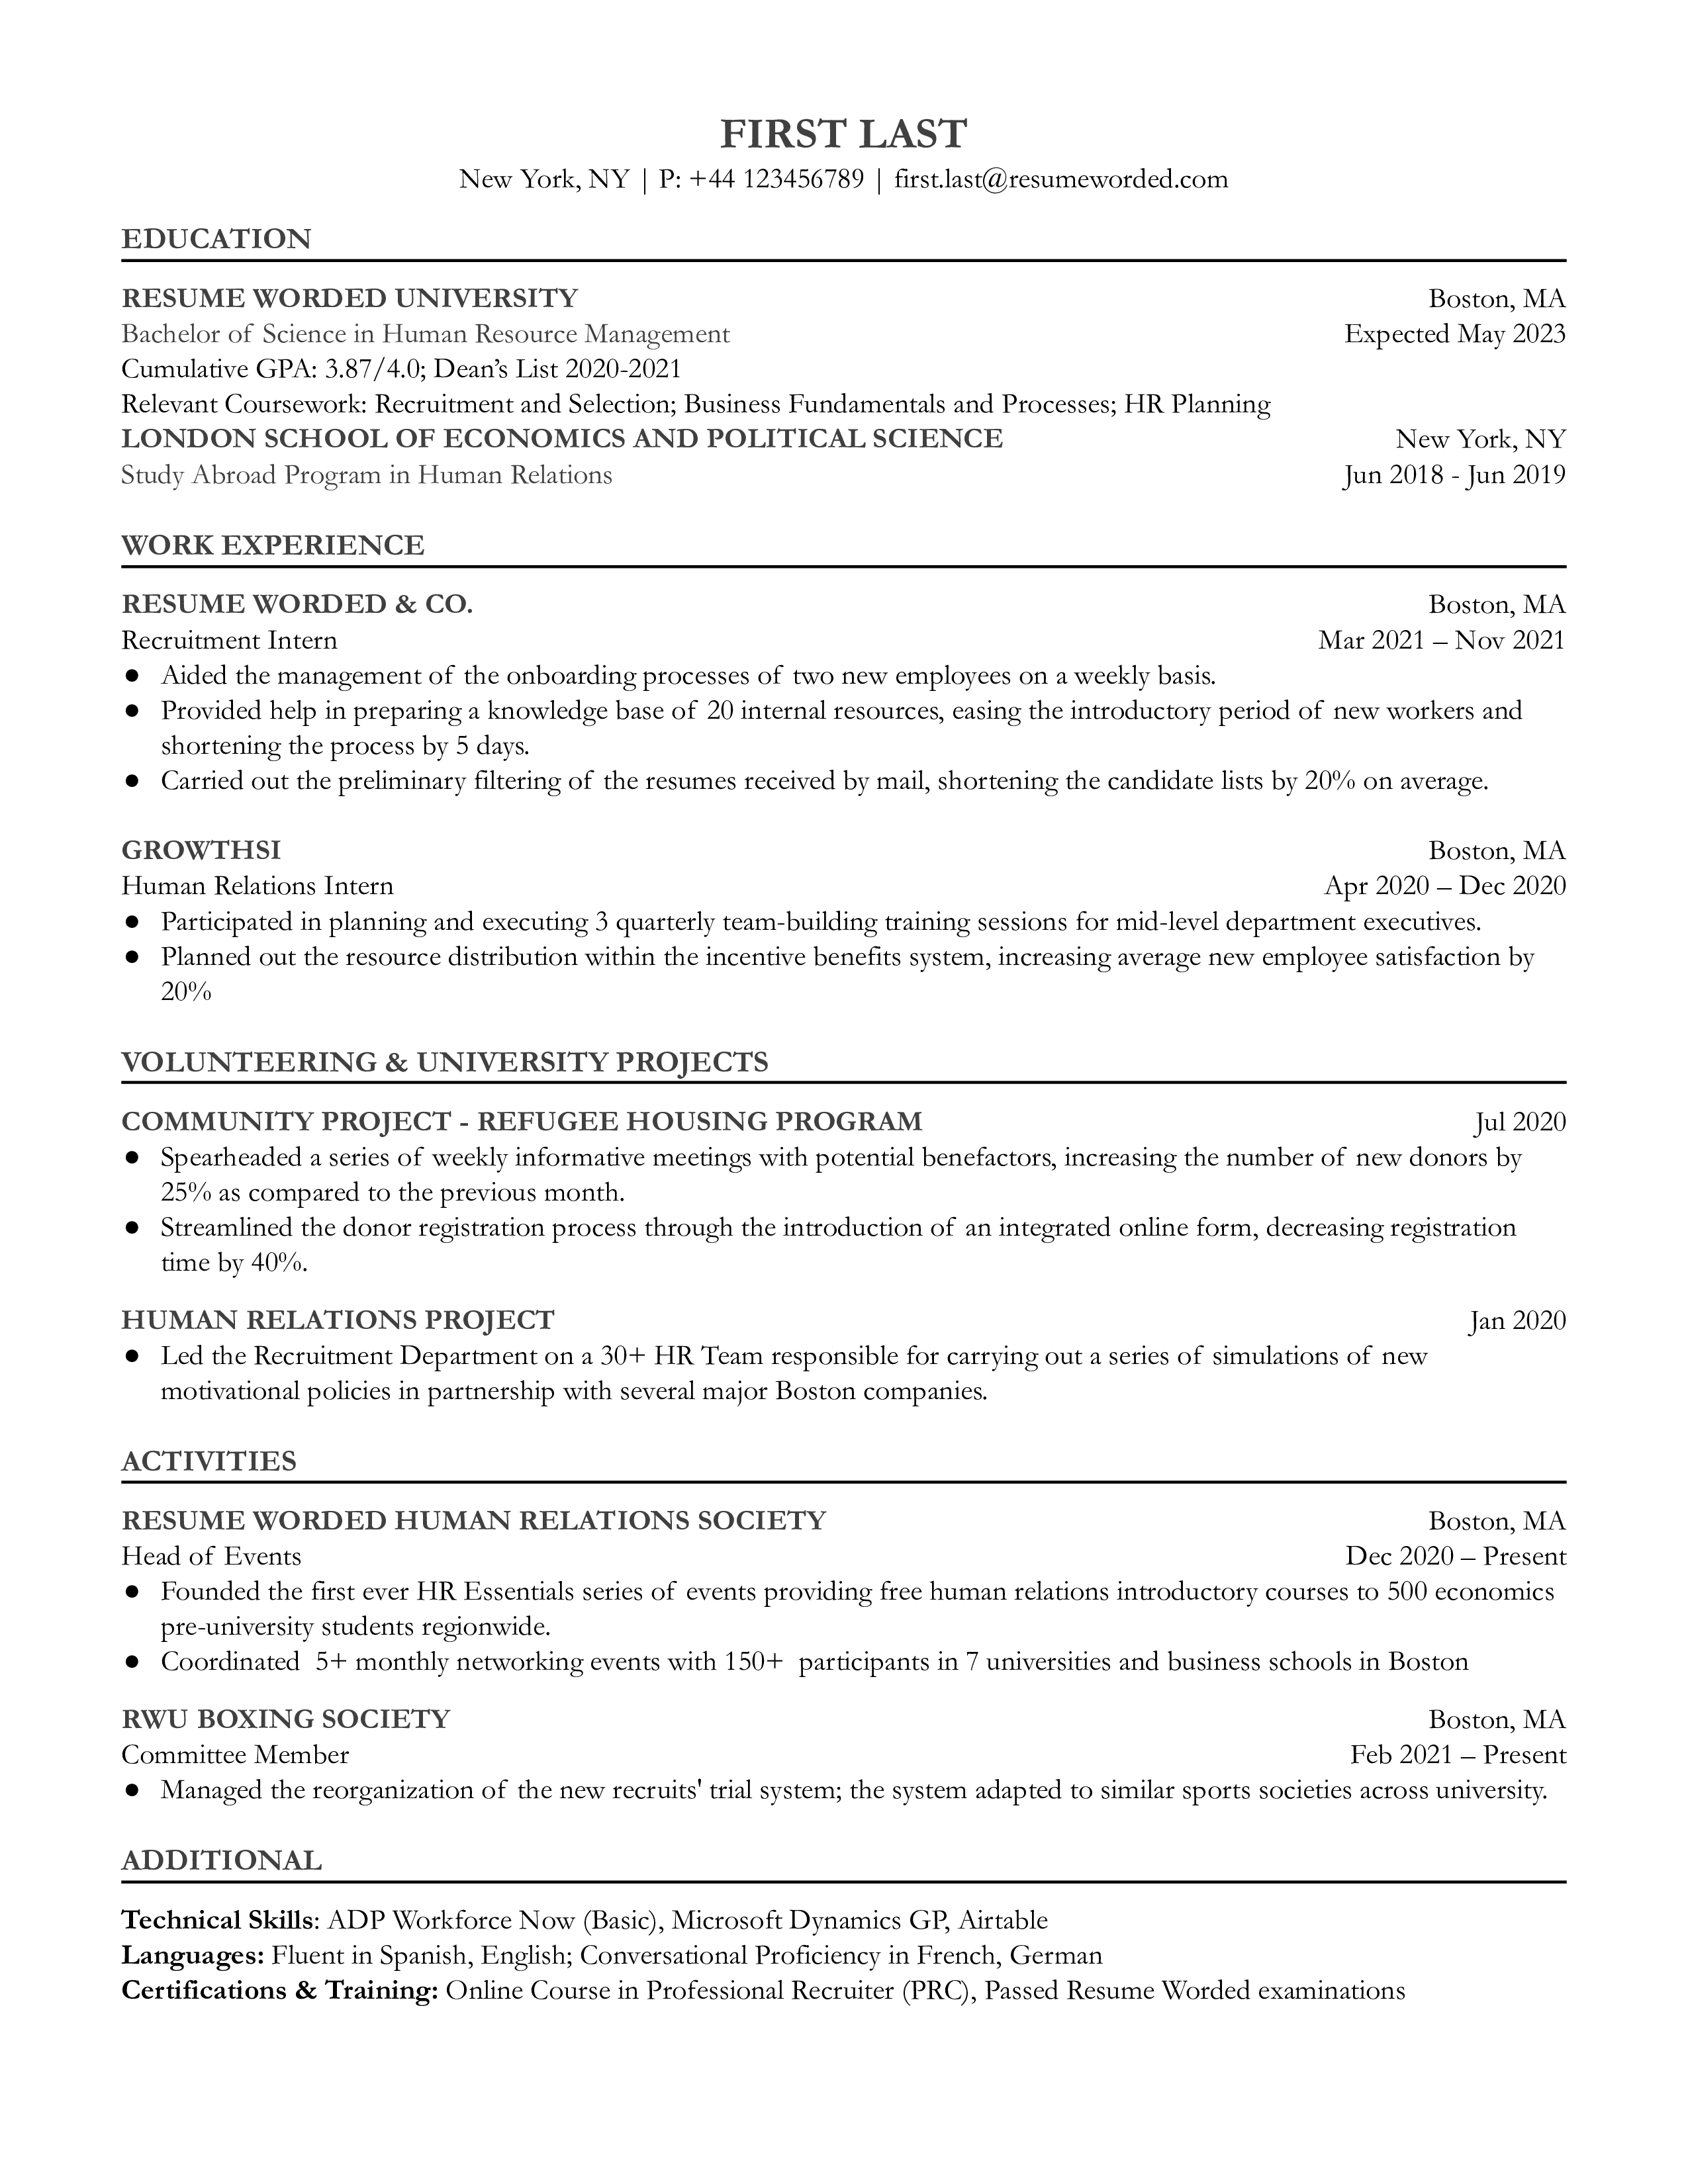 CV screenshot showcasing key skills and experiences for an Entry-Level Recruiter role.